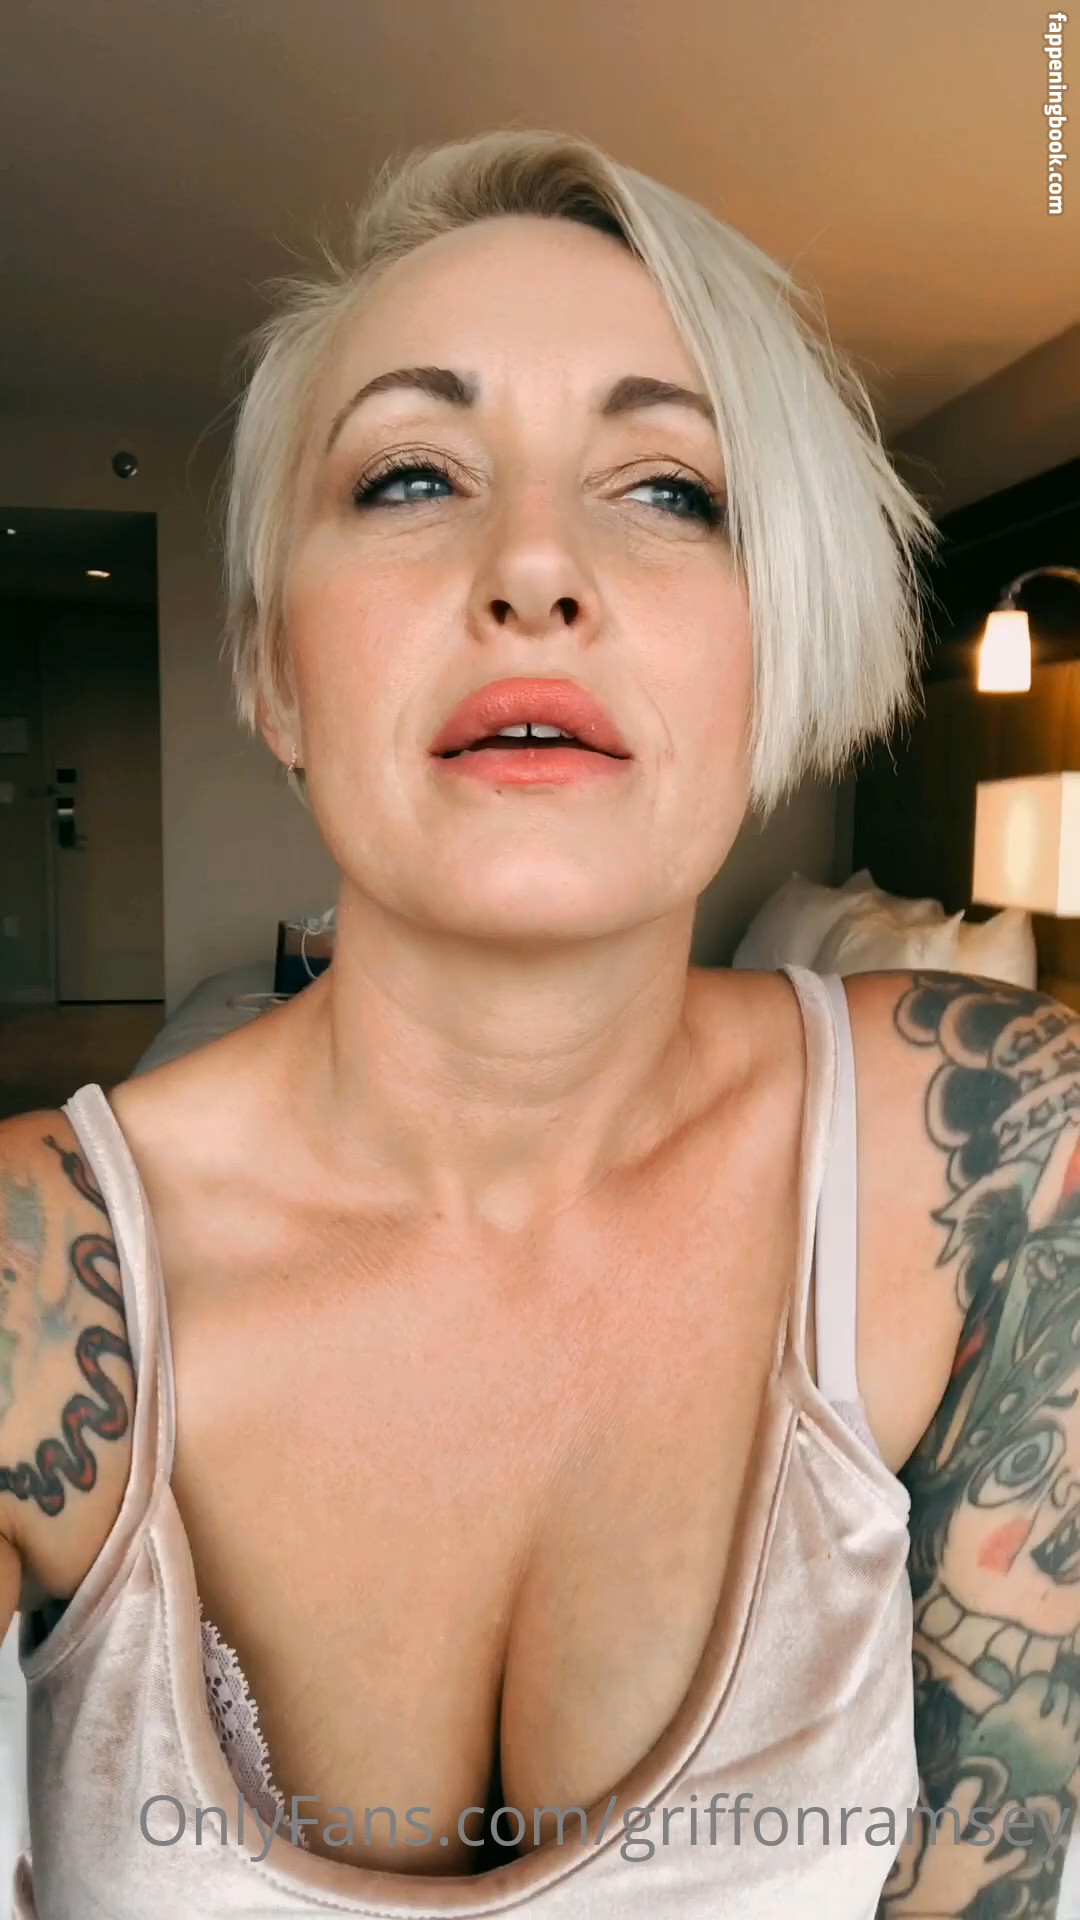 Griffon Ramsey / griffonramsey Nude, OnlyFans Leaks, The Fappening - Photo ...